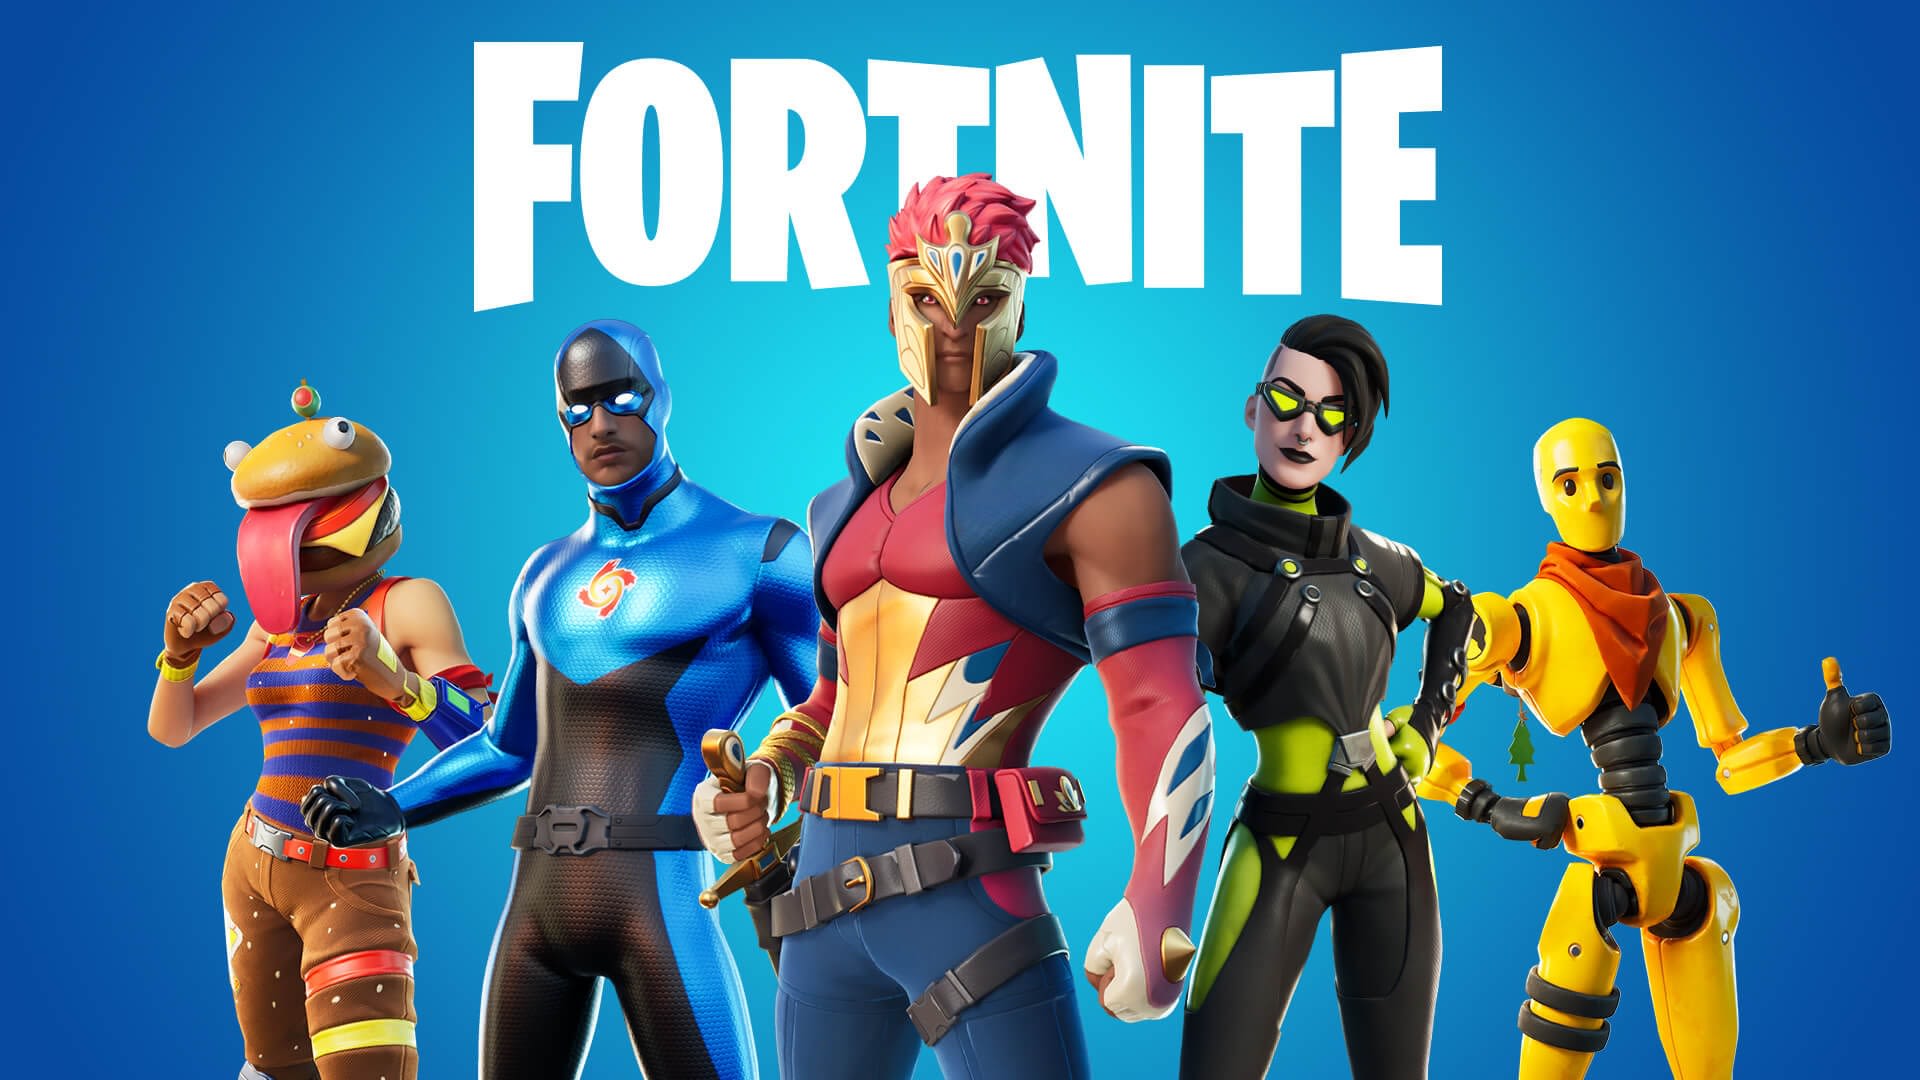 Epic confirms that Fortnite and the Epic Games store are coming to iPad